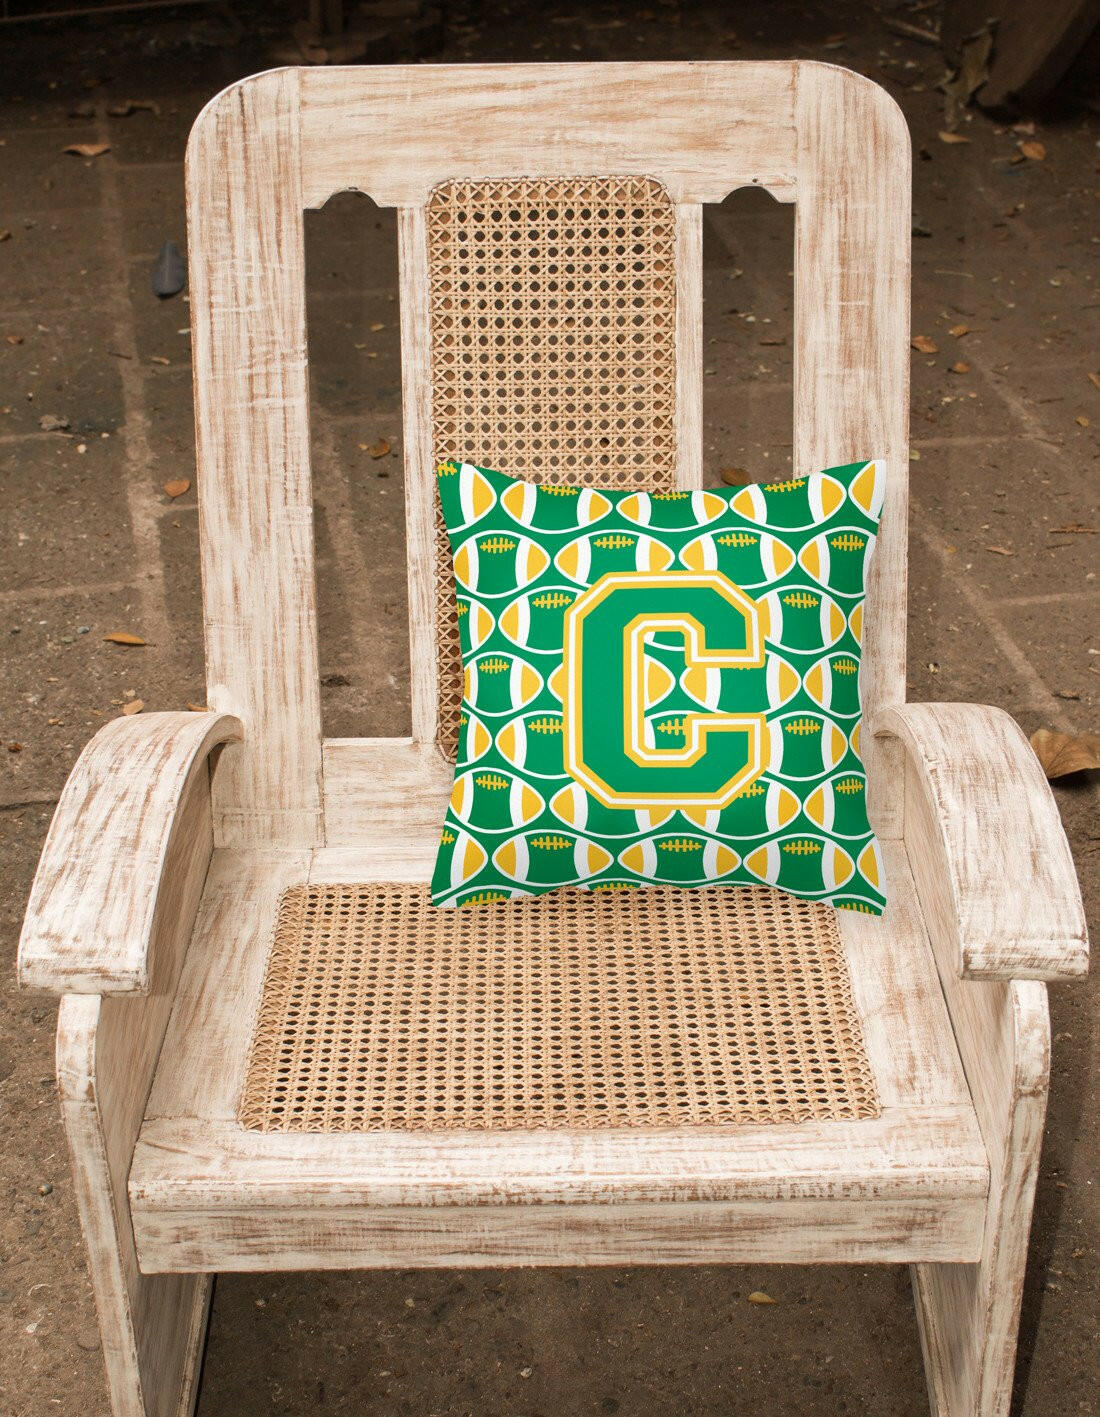 Letter C Football Green and Gold Fabric Decorative Pillow CJ1069-CPW1414 by Caroline's Treasures